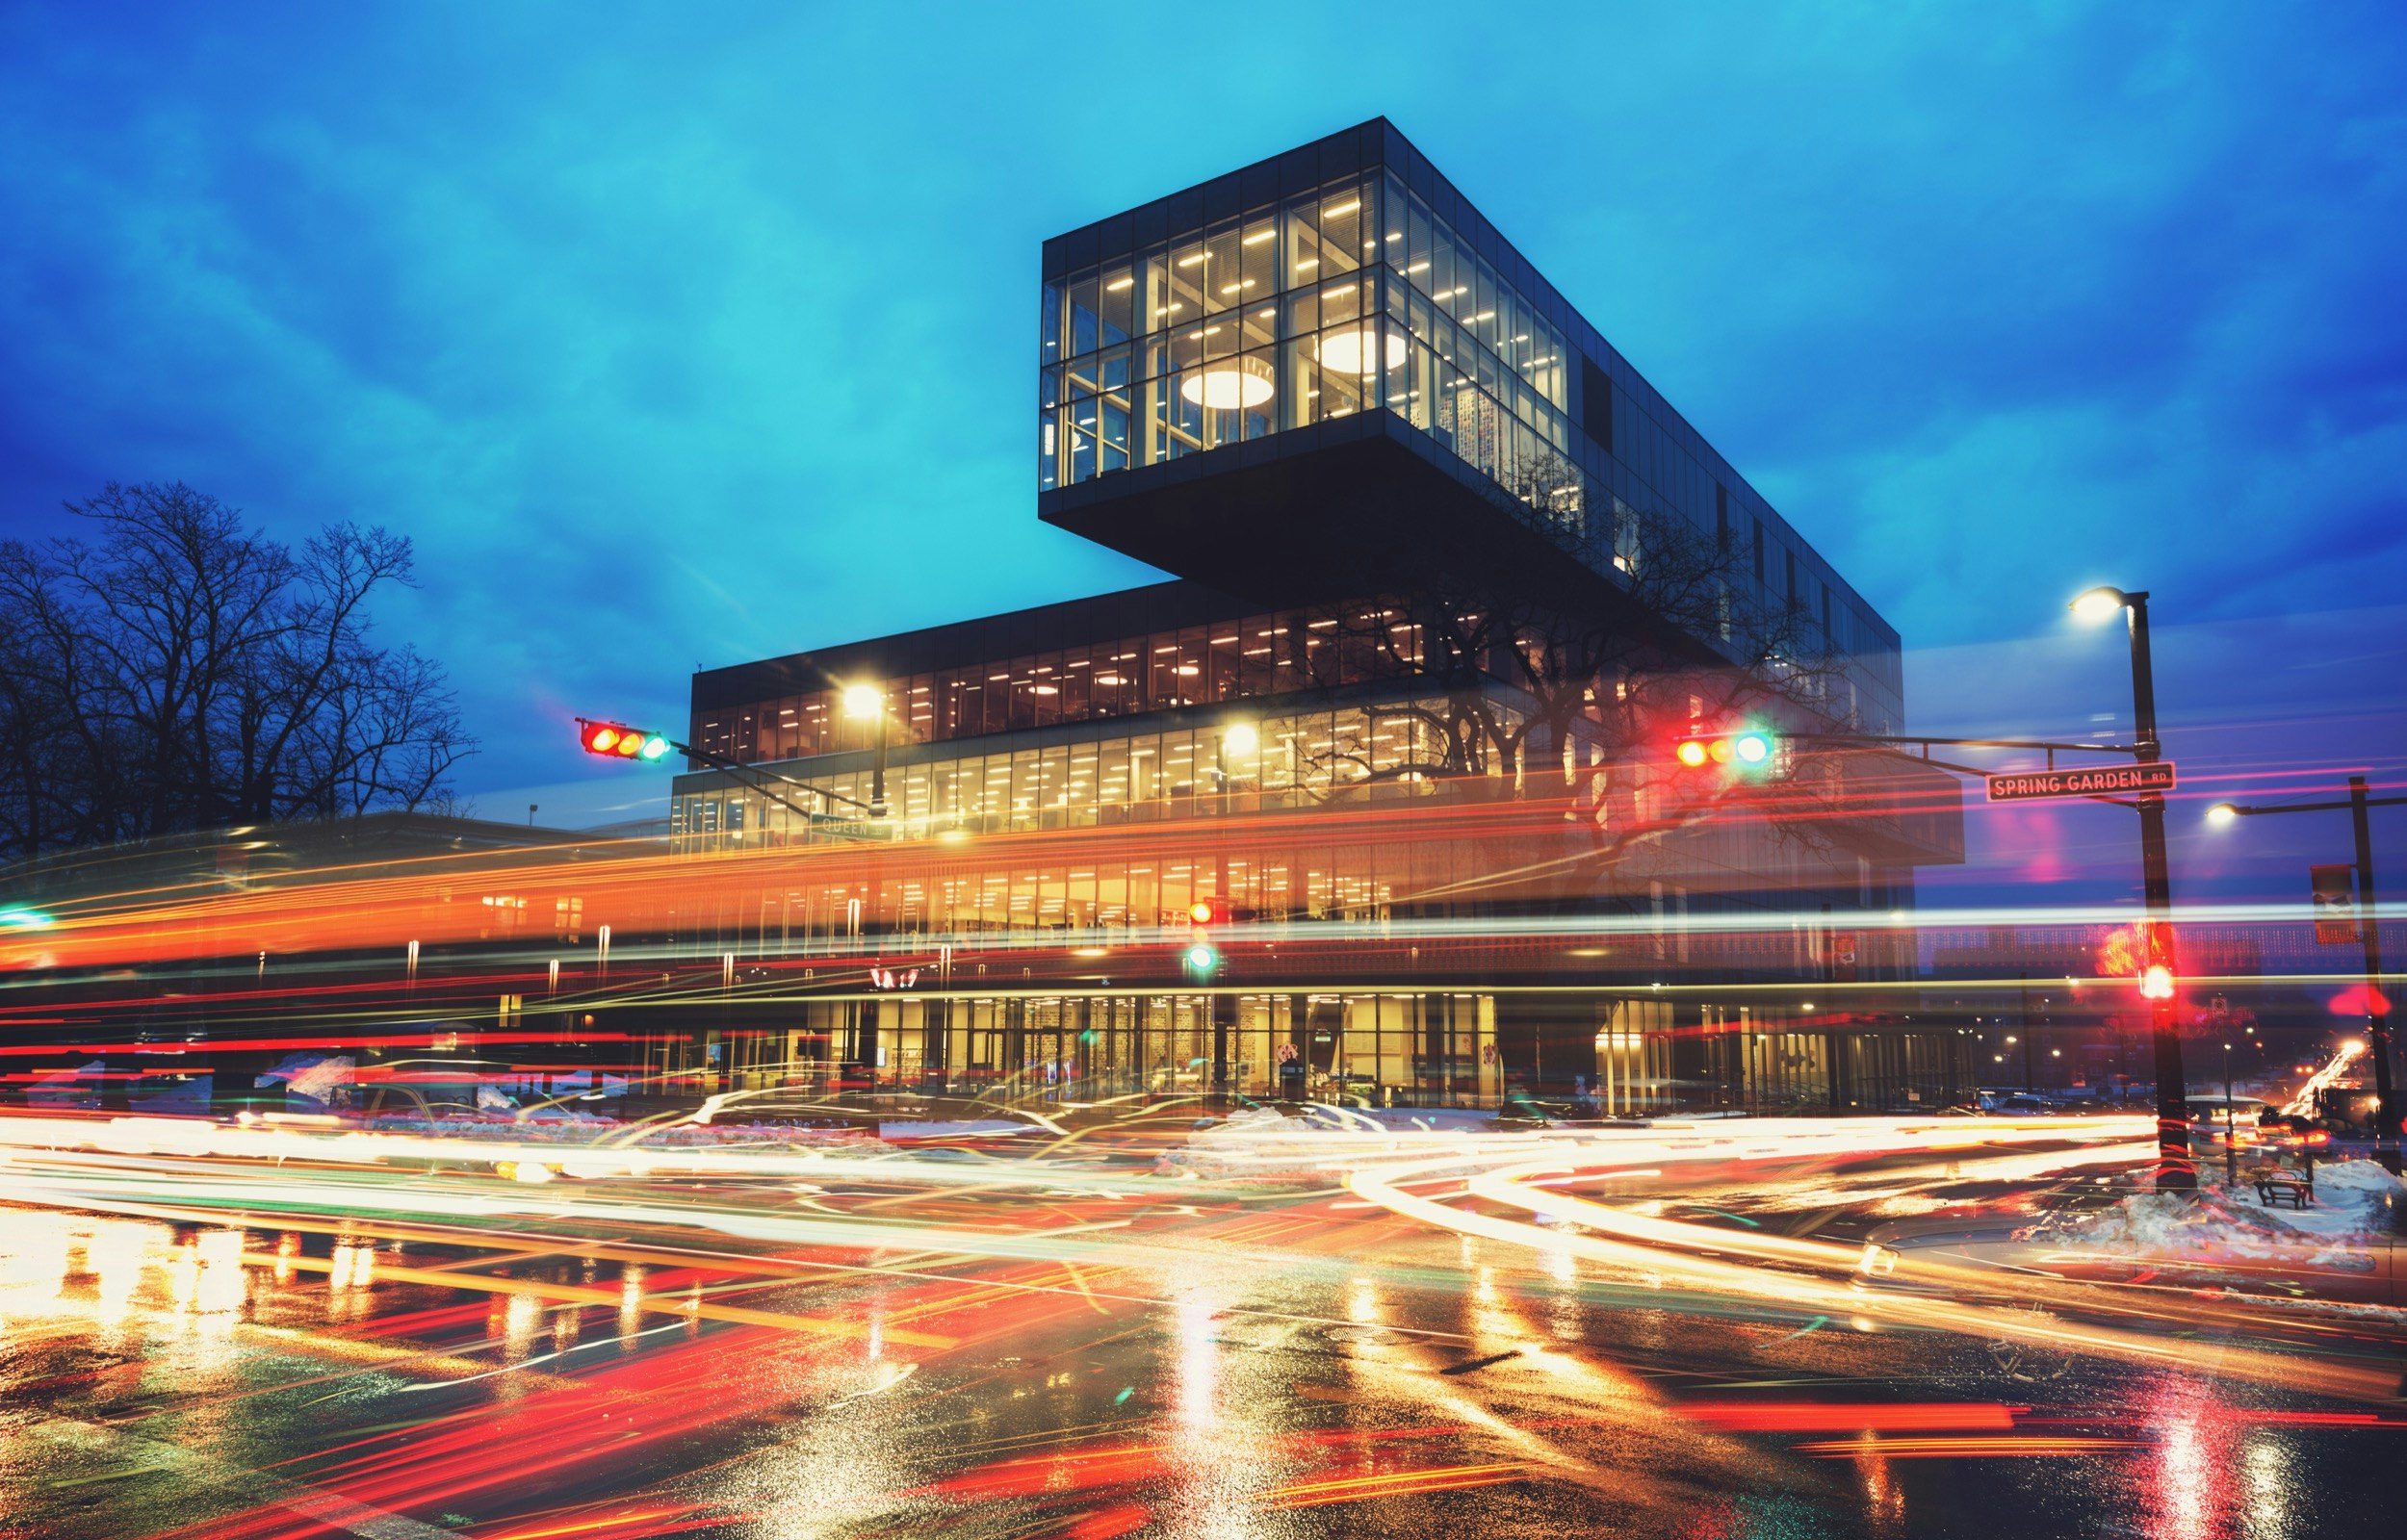 Motion blur is applied to the lights of cars as they drive around the Halifax Central Library as dusk turns to night